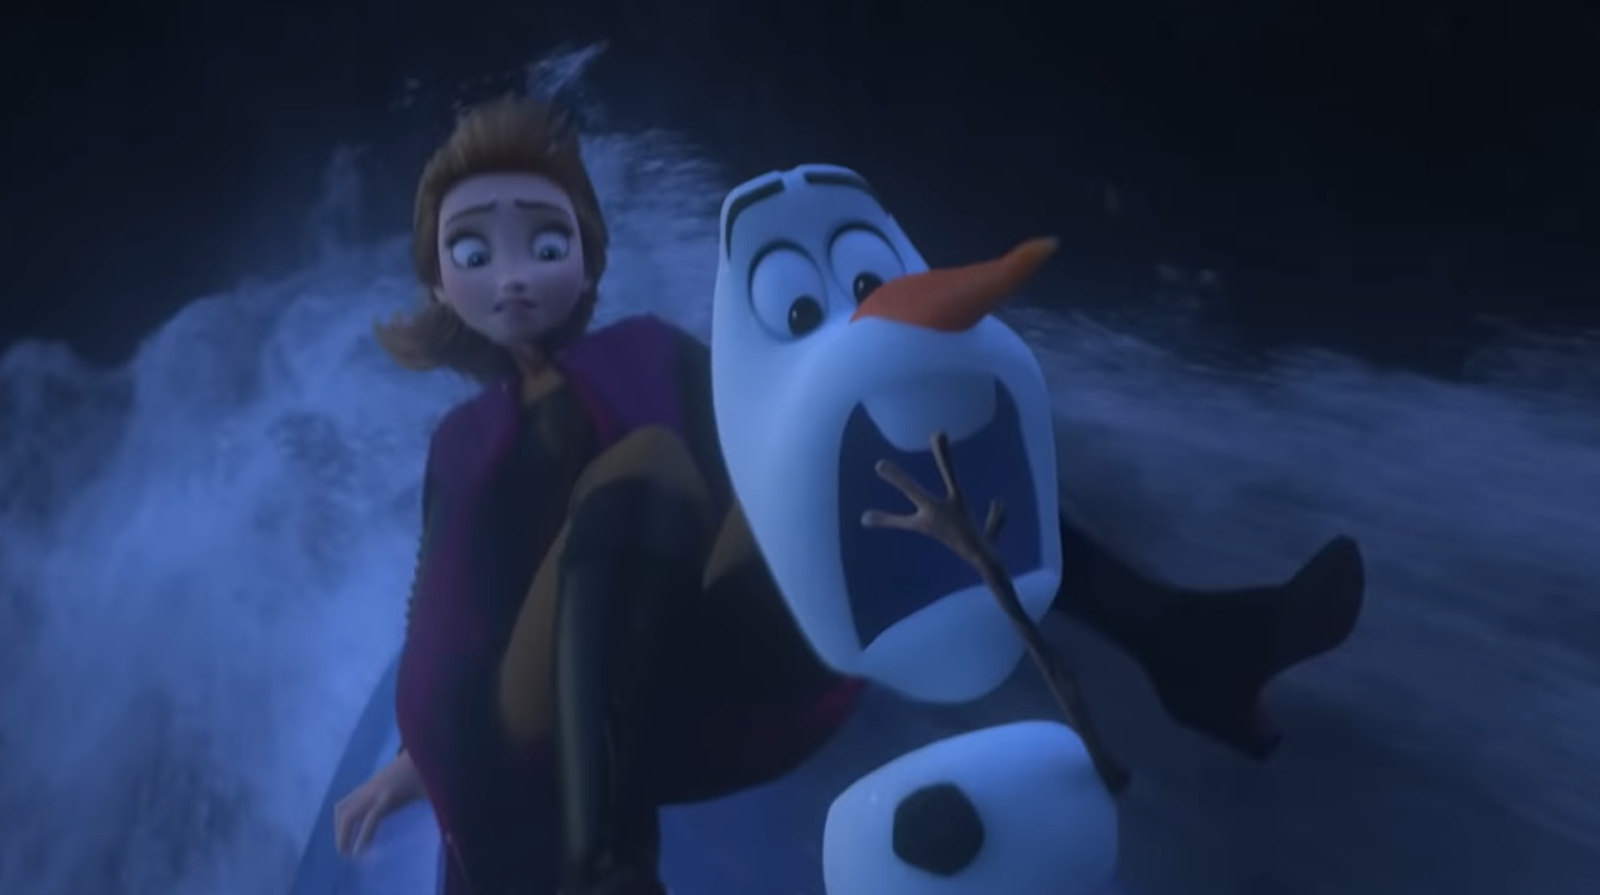 TV Spots Revealed for "Frozen 2" Opening November 22nd - LaughingPlace.com